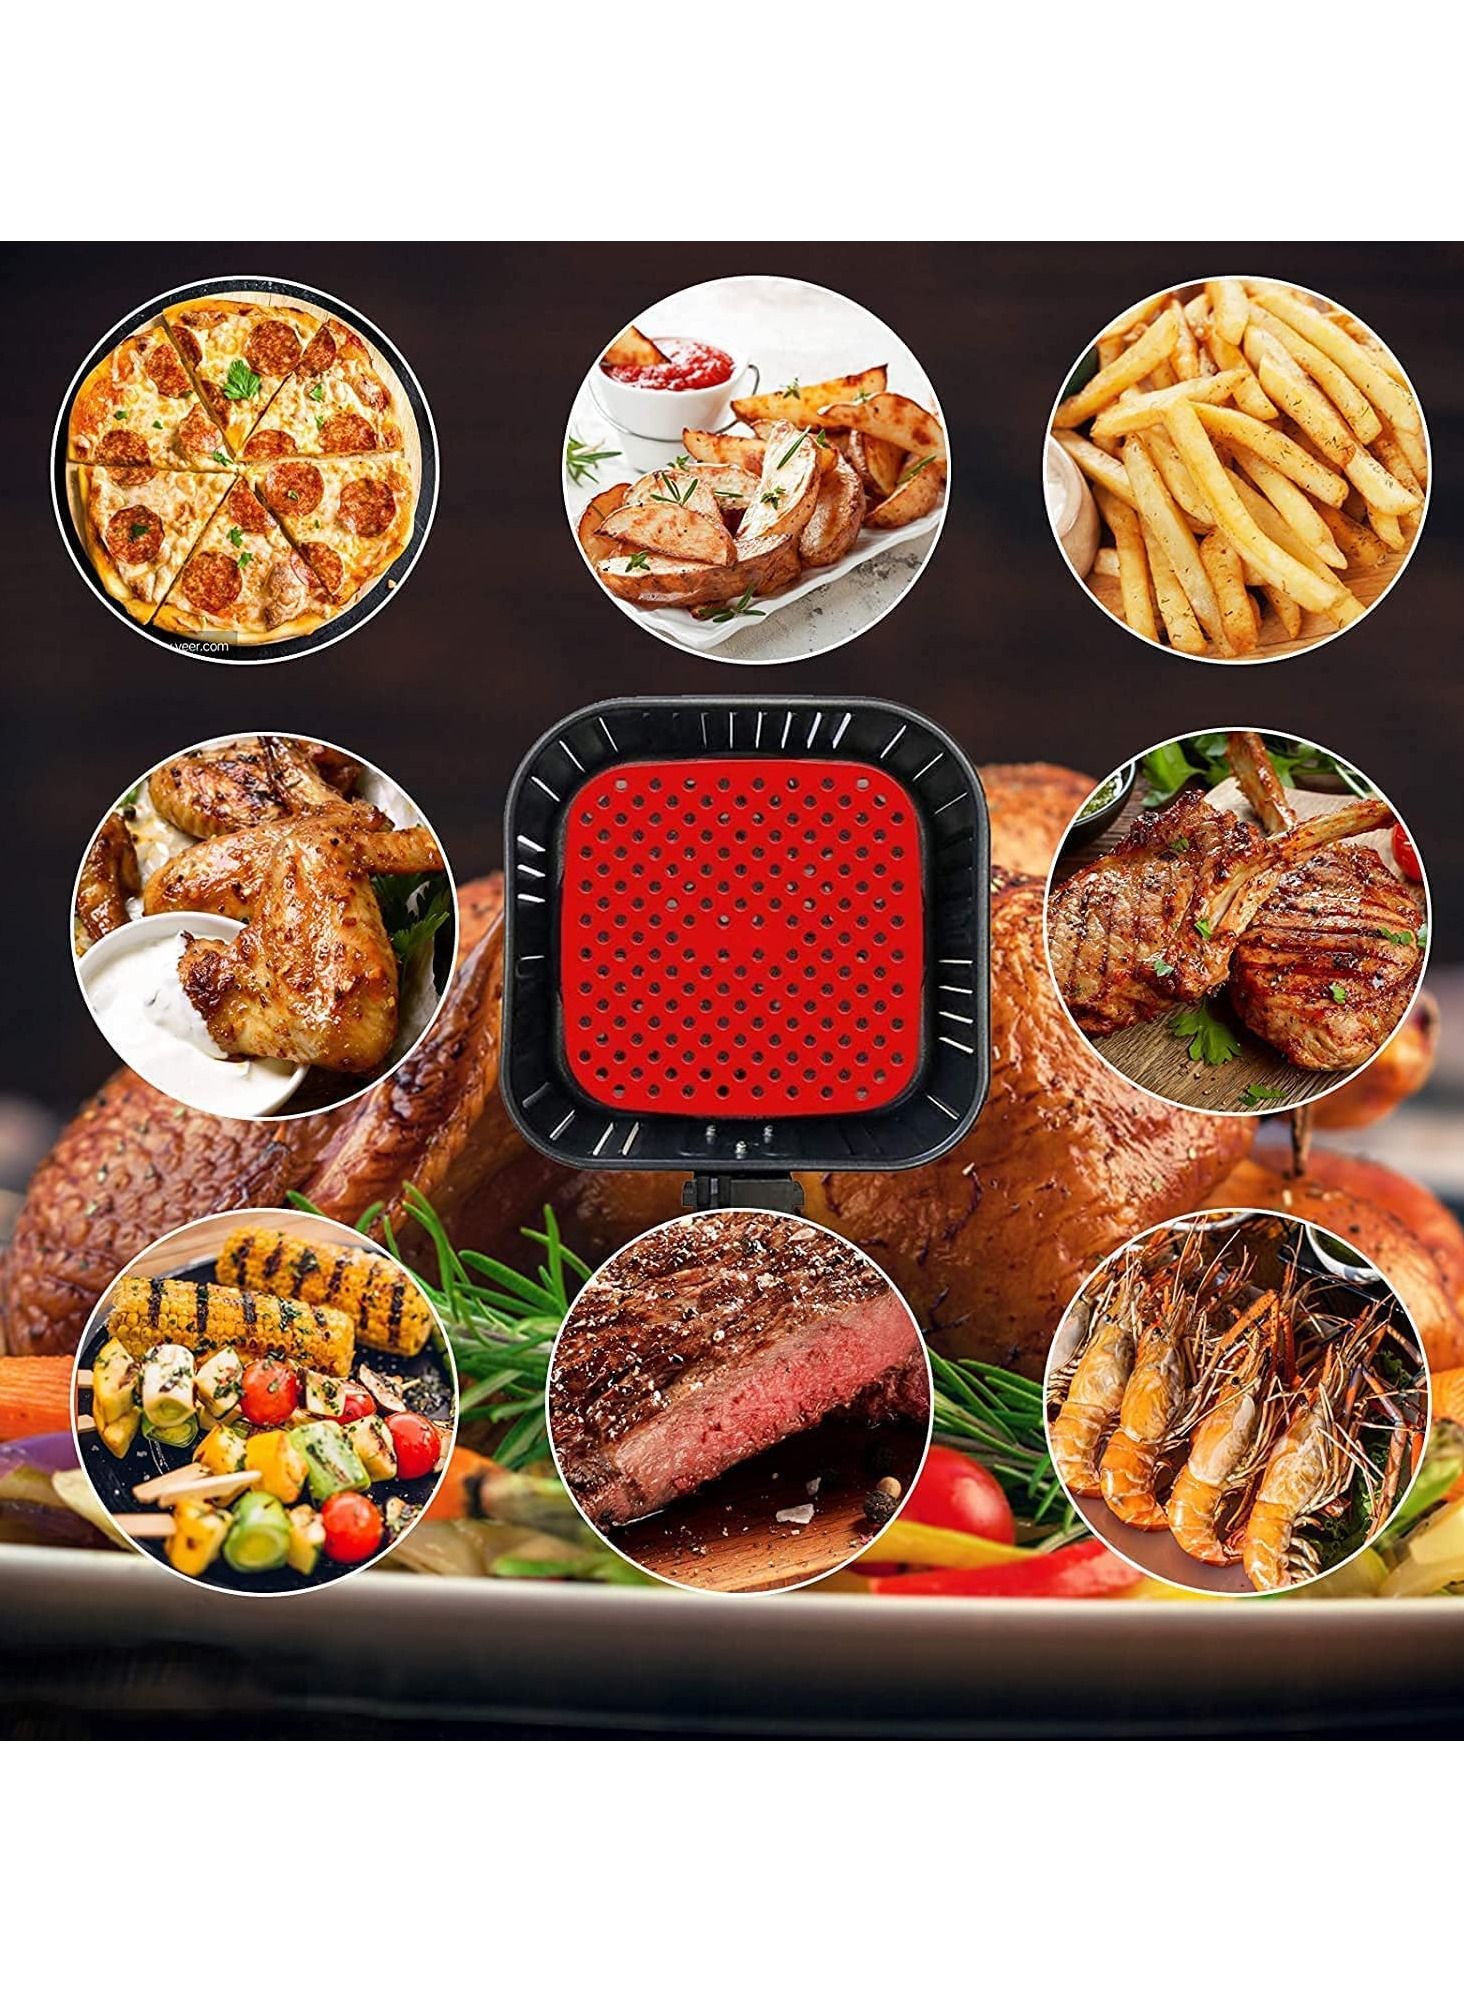 Non-Stick Silicone Air Fryer Mats Reusable Fryer Liners ¨C 7.5 Inch Square Accessories for COSORI 3.4 3.7 QT CHEFMAN BELLA PRO and MORE | BPA Free (2-Pack) 